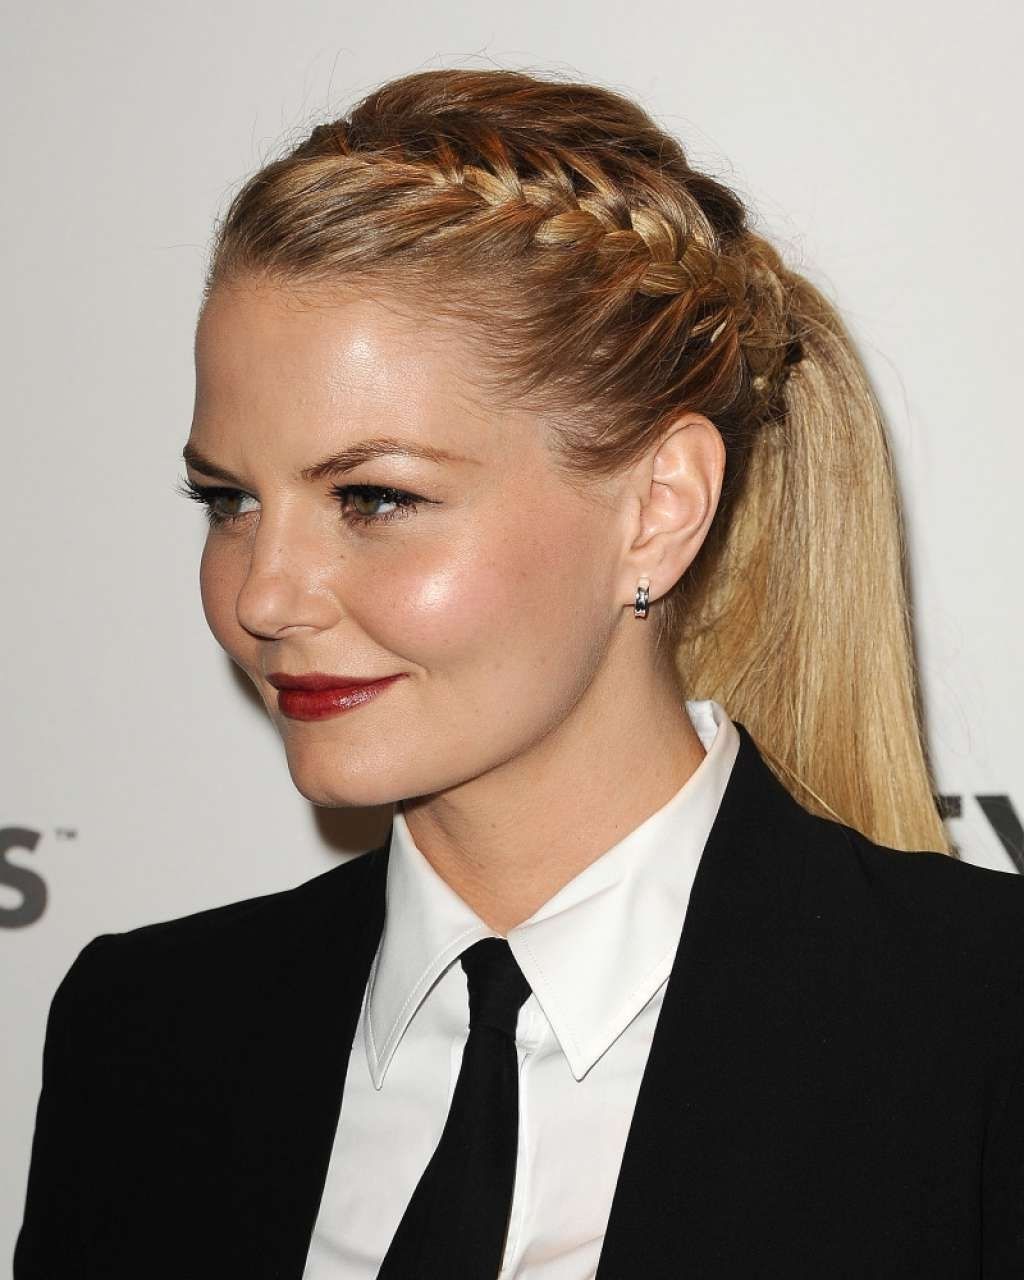 Stylish Ponytail Hairstyle With Braid Wrapped Around Head Pertaining To Well Known Pony Hairstyles With Wrap Around Braid For Short Hair (View 11 of 20)